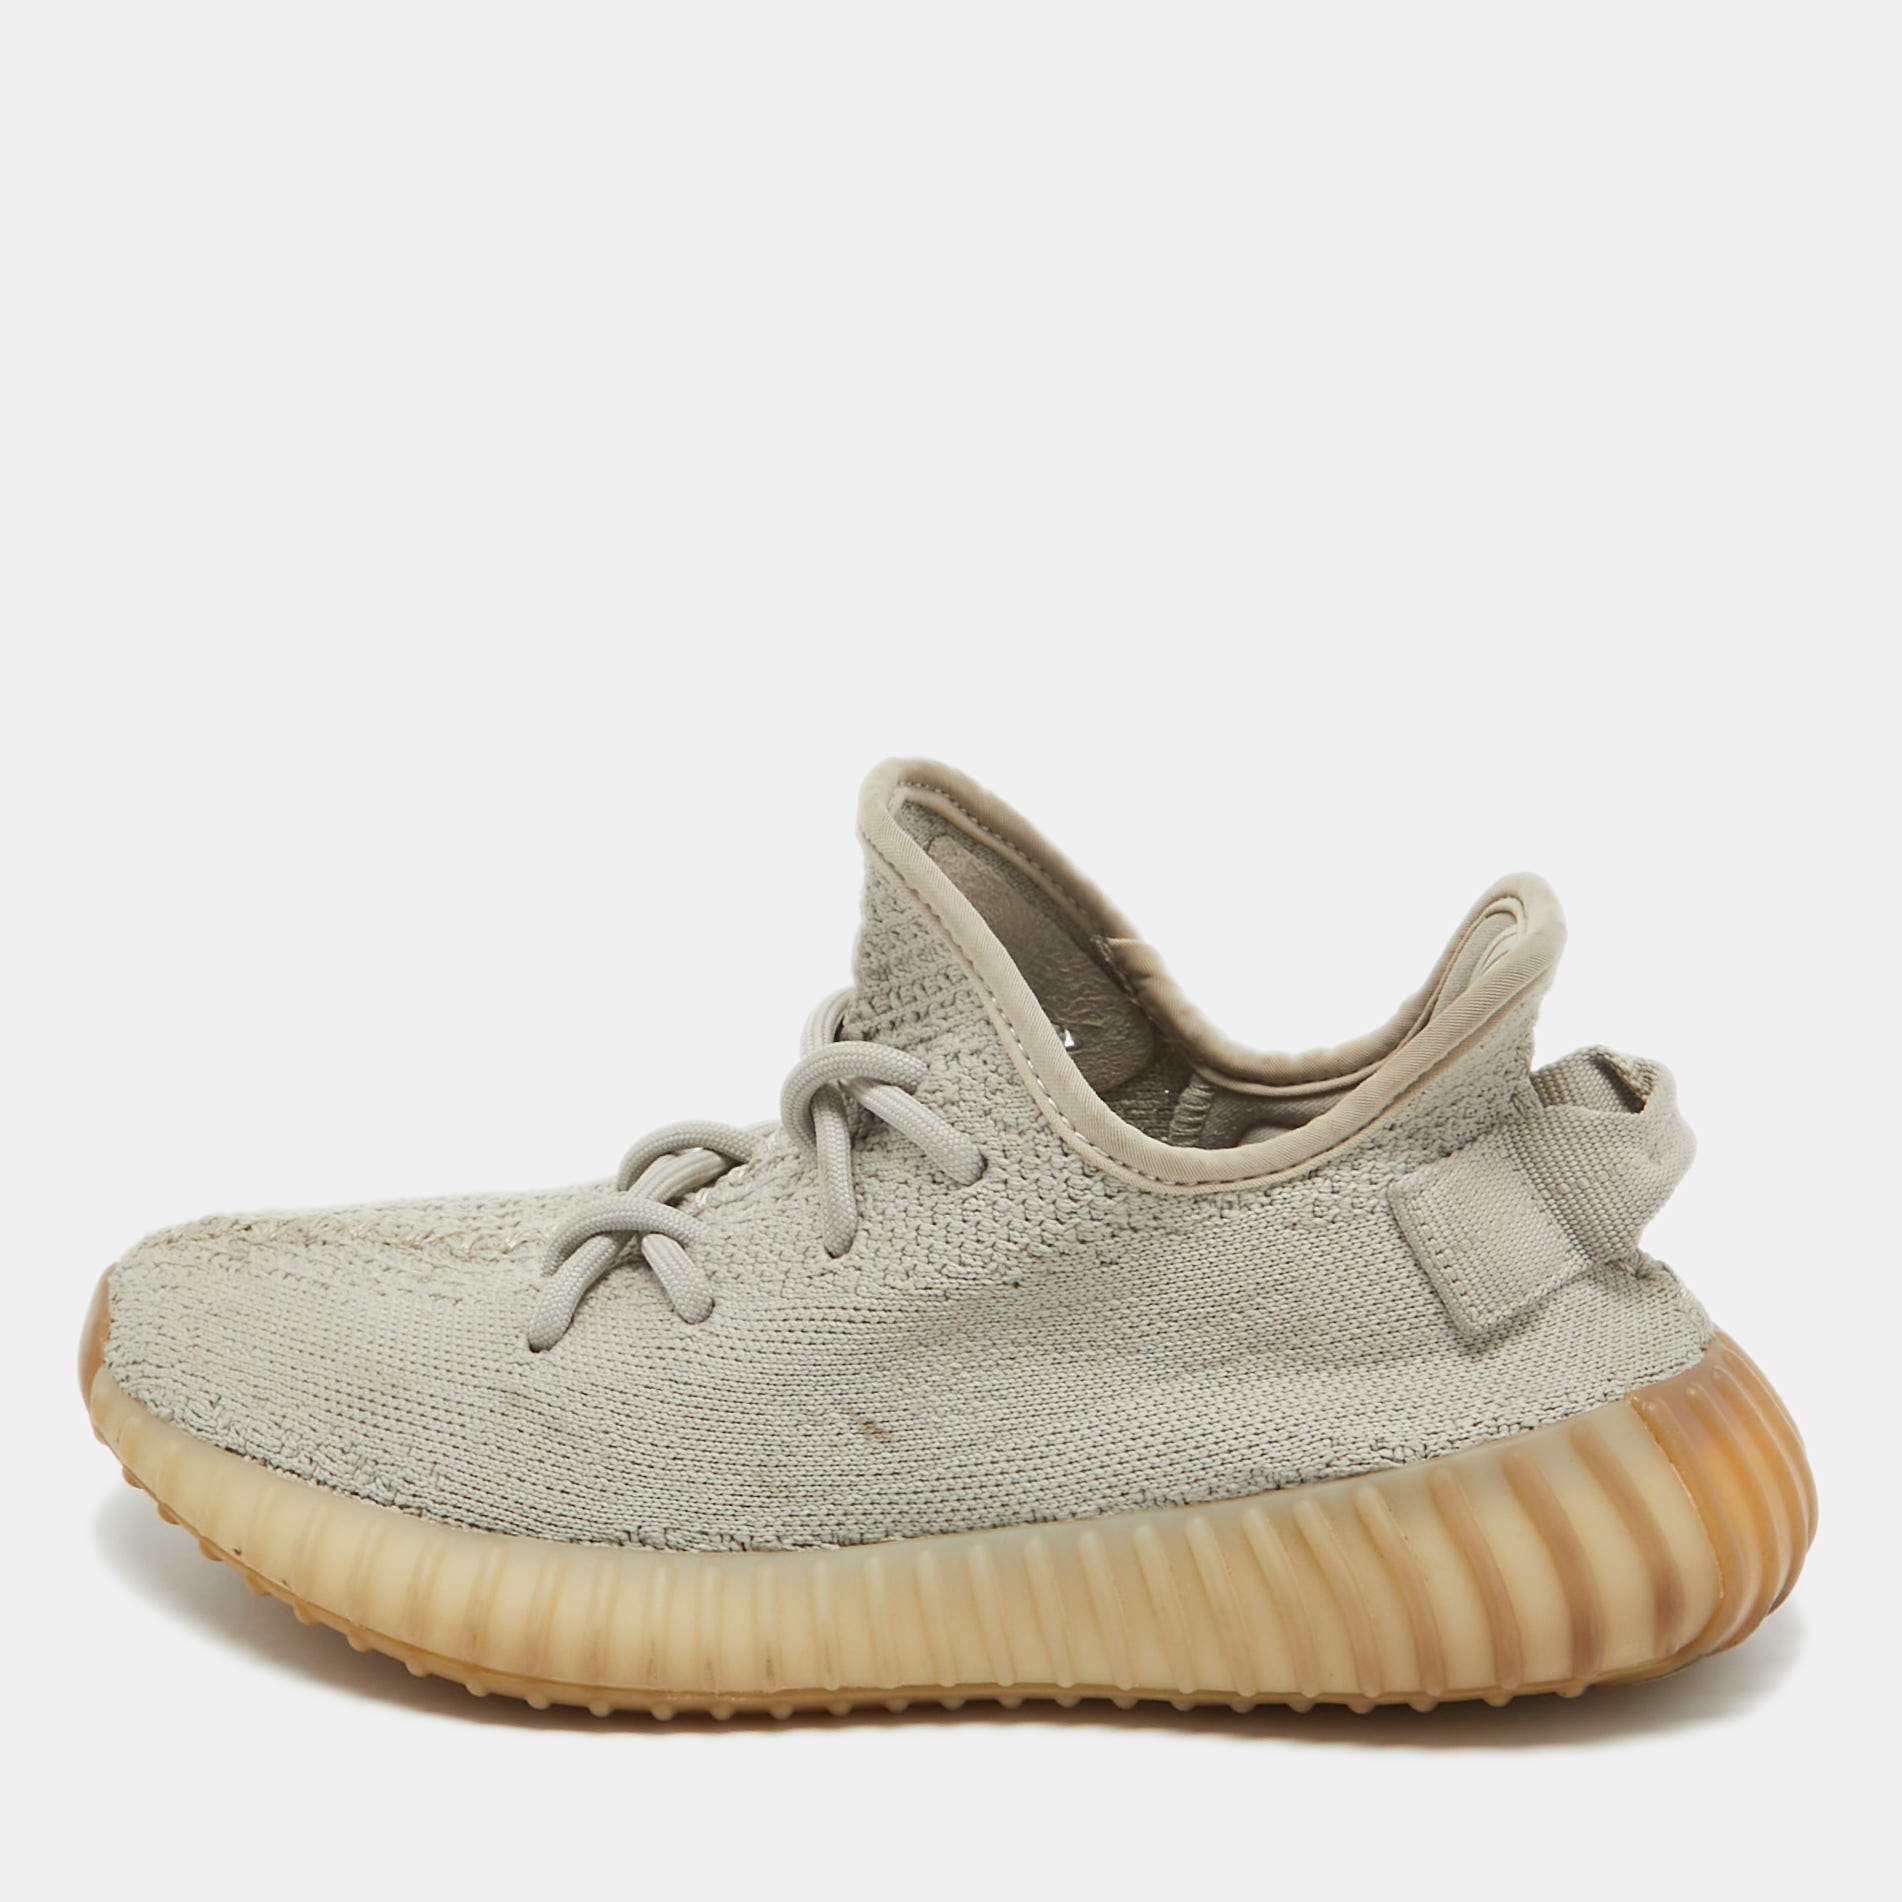 Yeezy x Adidas Grey Knit Fabric Boost 350 V2 Sesame Sneakers